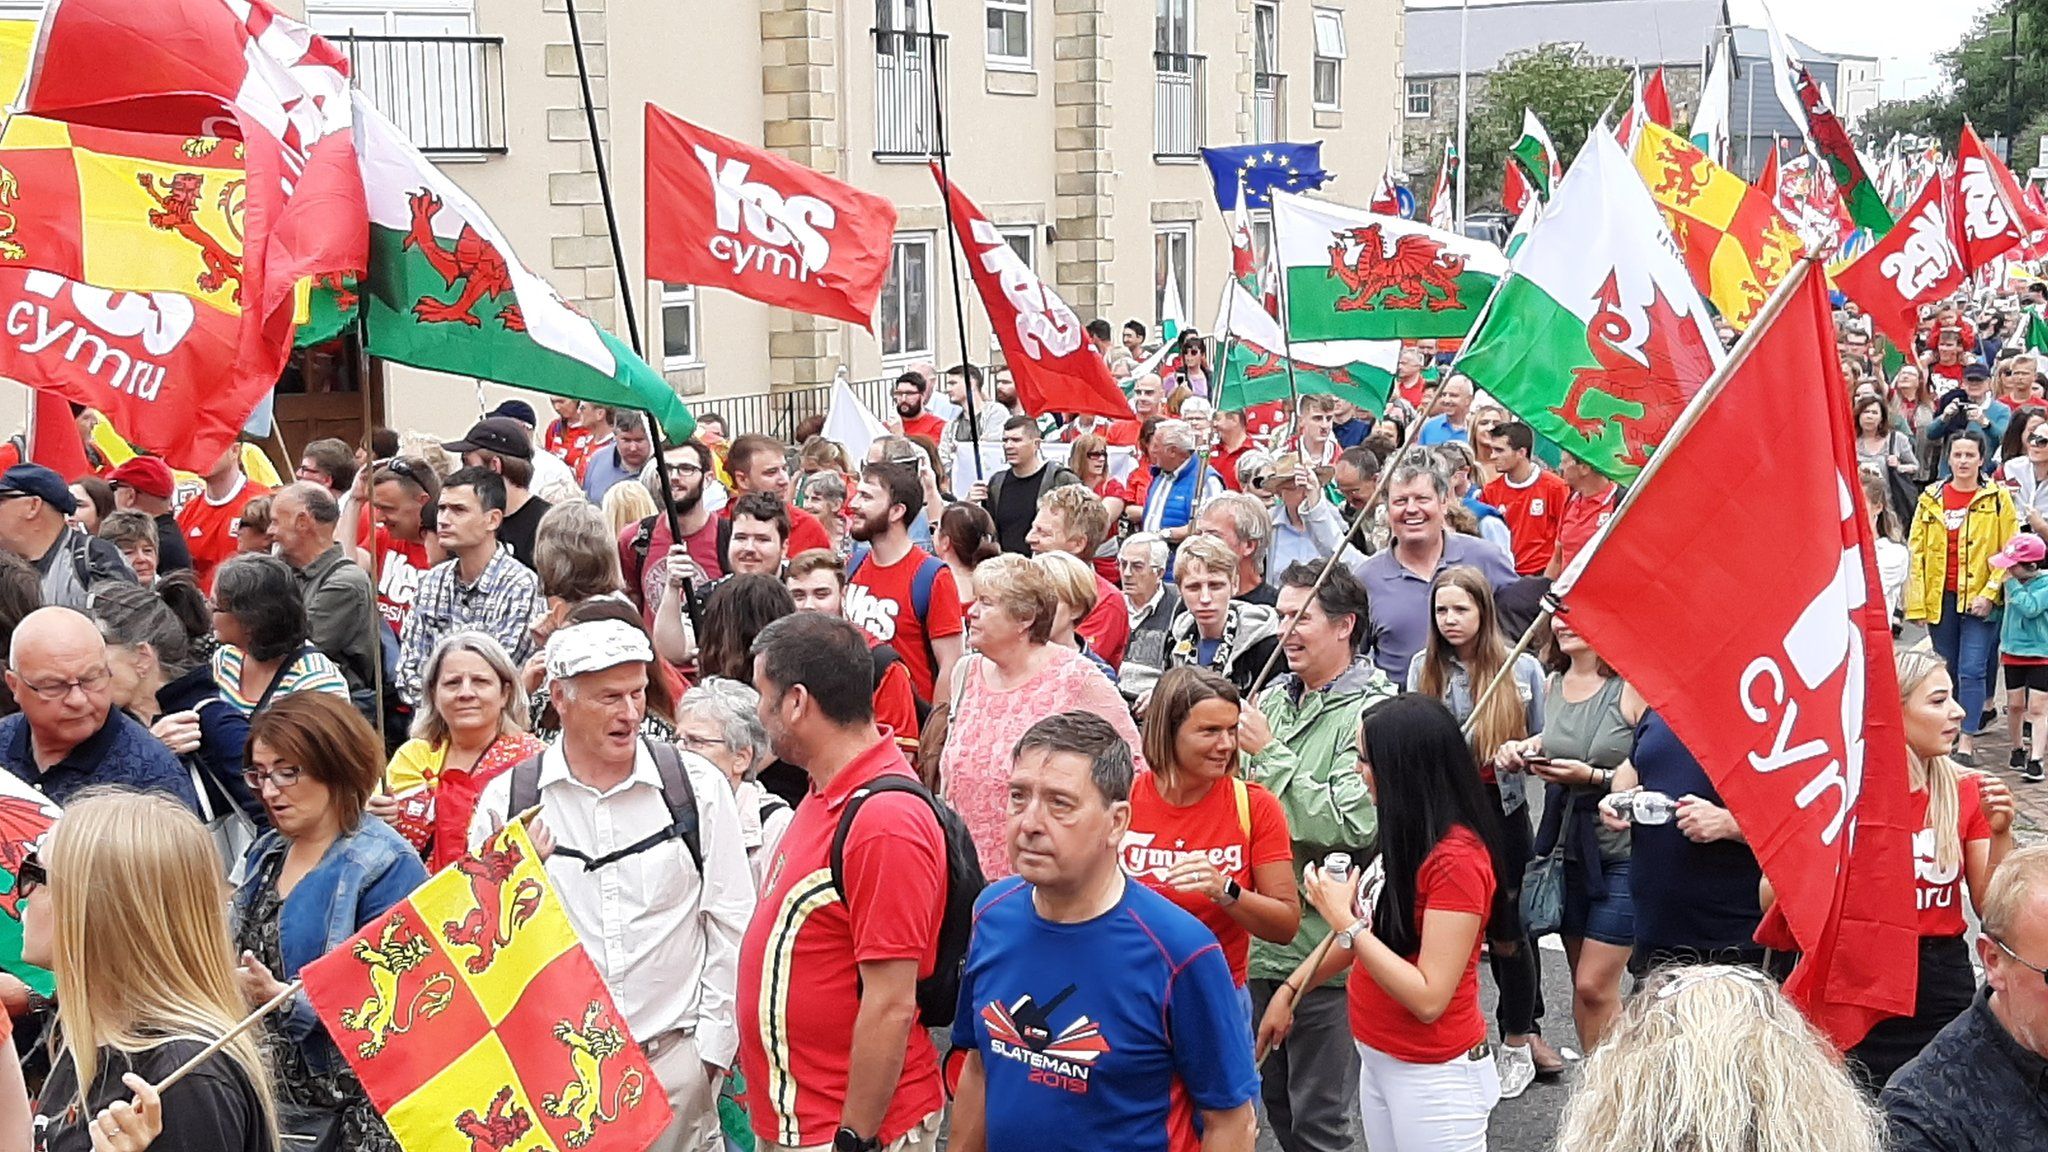 Thousands march for Welsh independence in Caernarfon